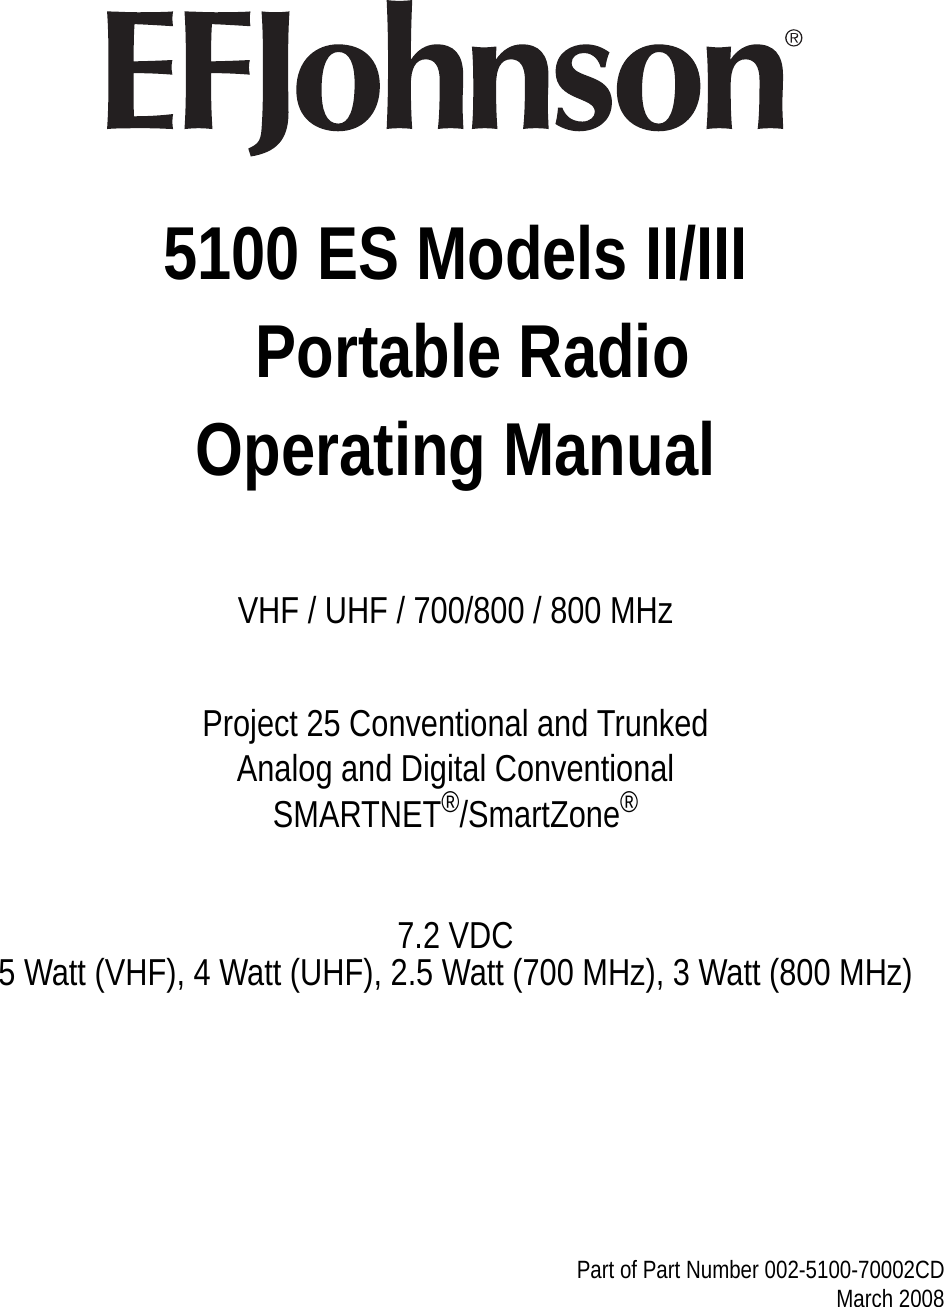 5100 ES Models II/III  Portable RadioOperating ManualVHF / UHF / 700/800 / 800 MHzProject 25 Conventional and TrunkedAnalog and Digital ConventionalSMARTNET®/SmartZone®7.2 VDC5 Watt (VHF), 4 Watt (UHF), 2.5 Watt (700 MHz), 3 Watt (800 MHz)Part of Part Number 002-5100-70002CD March 2008